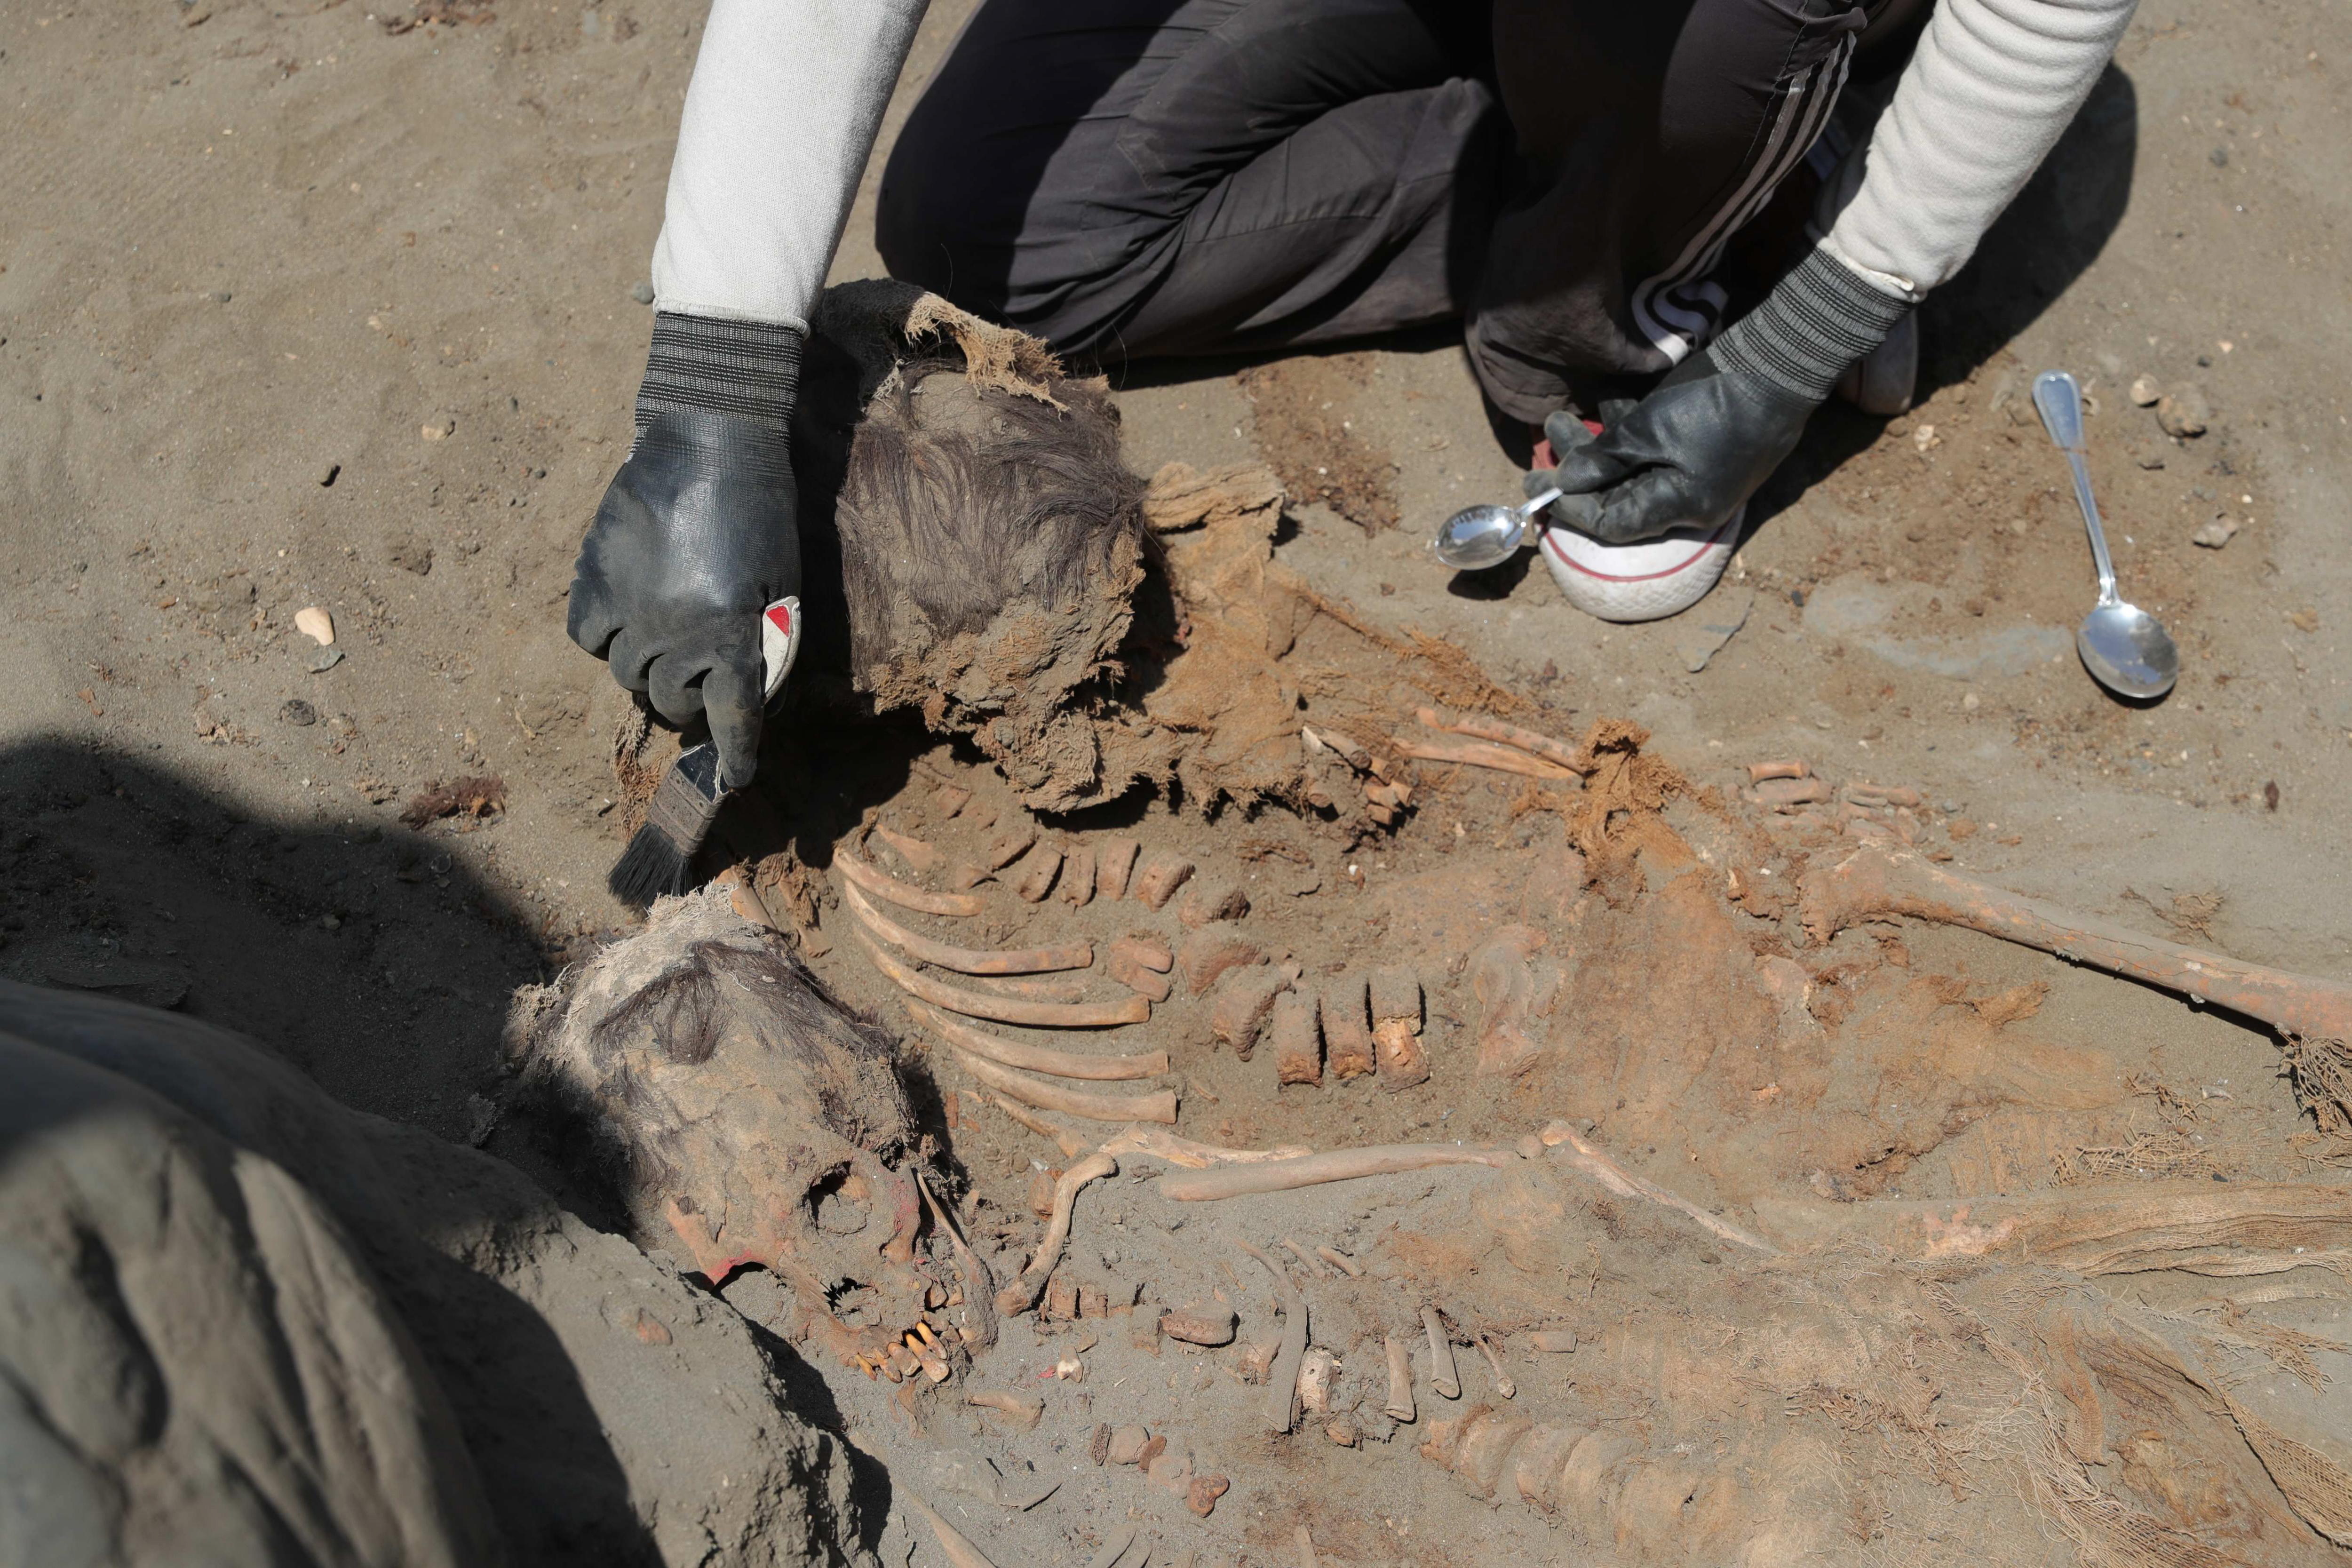 Weather: 15th century mass child sacrifice site in Peru may be linked